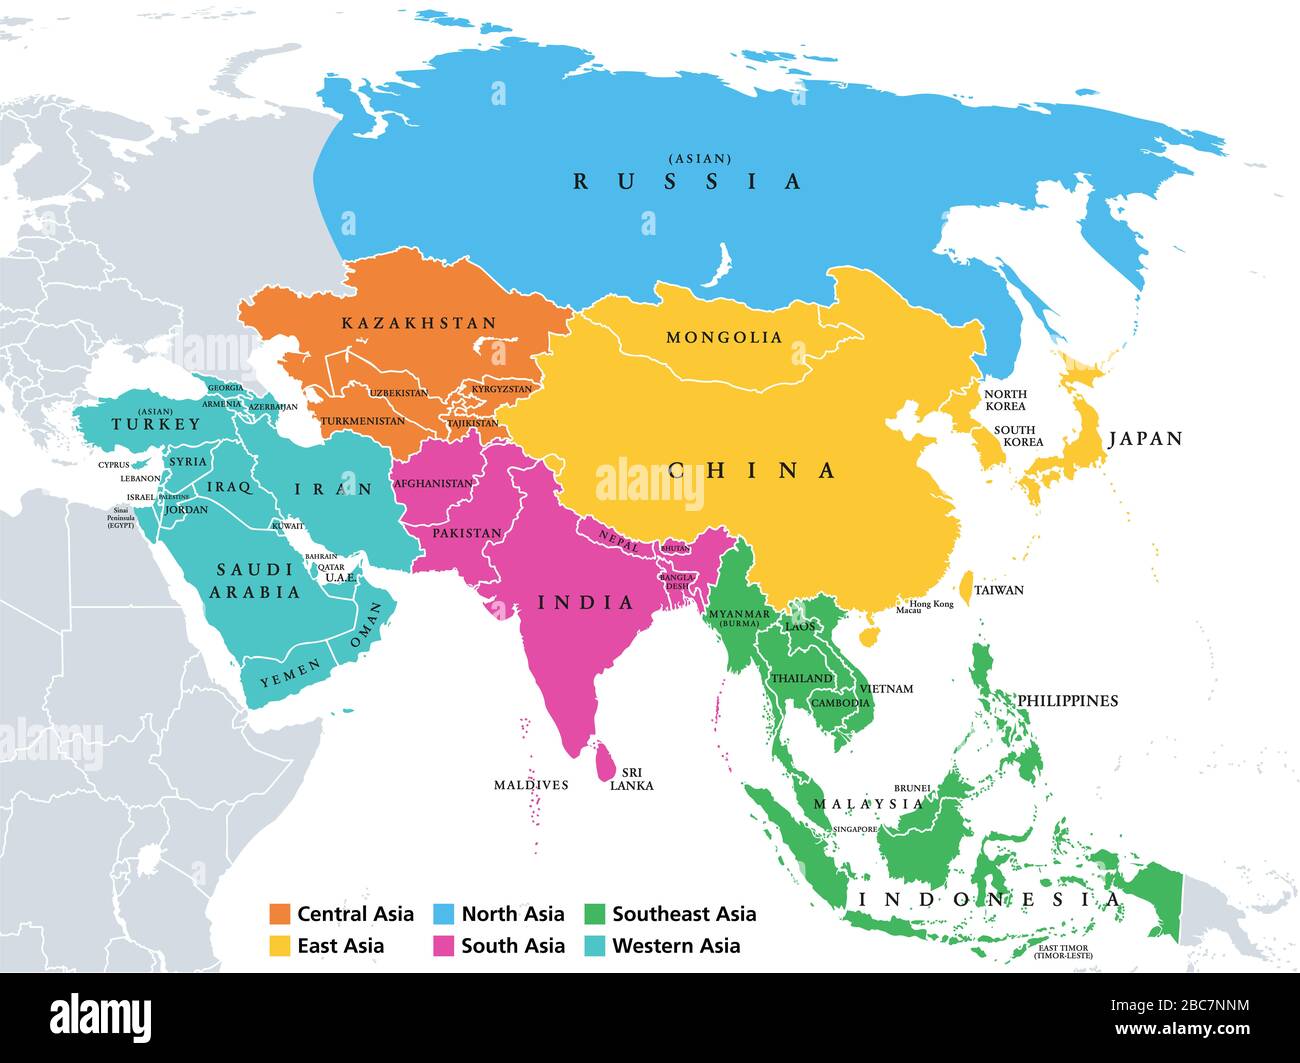 Asia. Regions. Political map with single countries. Colored subregions of the Asian continent. Central, East, North, South, Southeast, Western Asia. Stock Photo